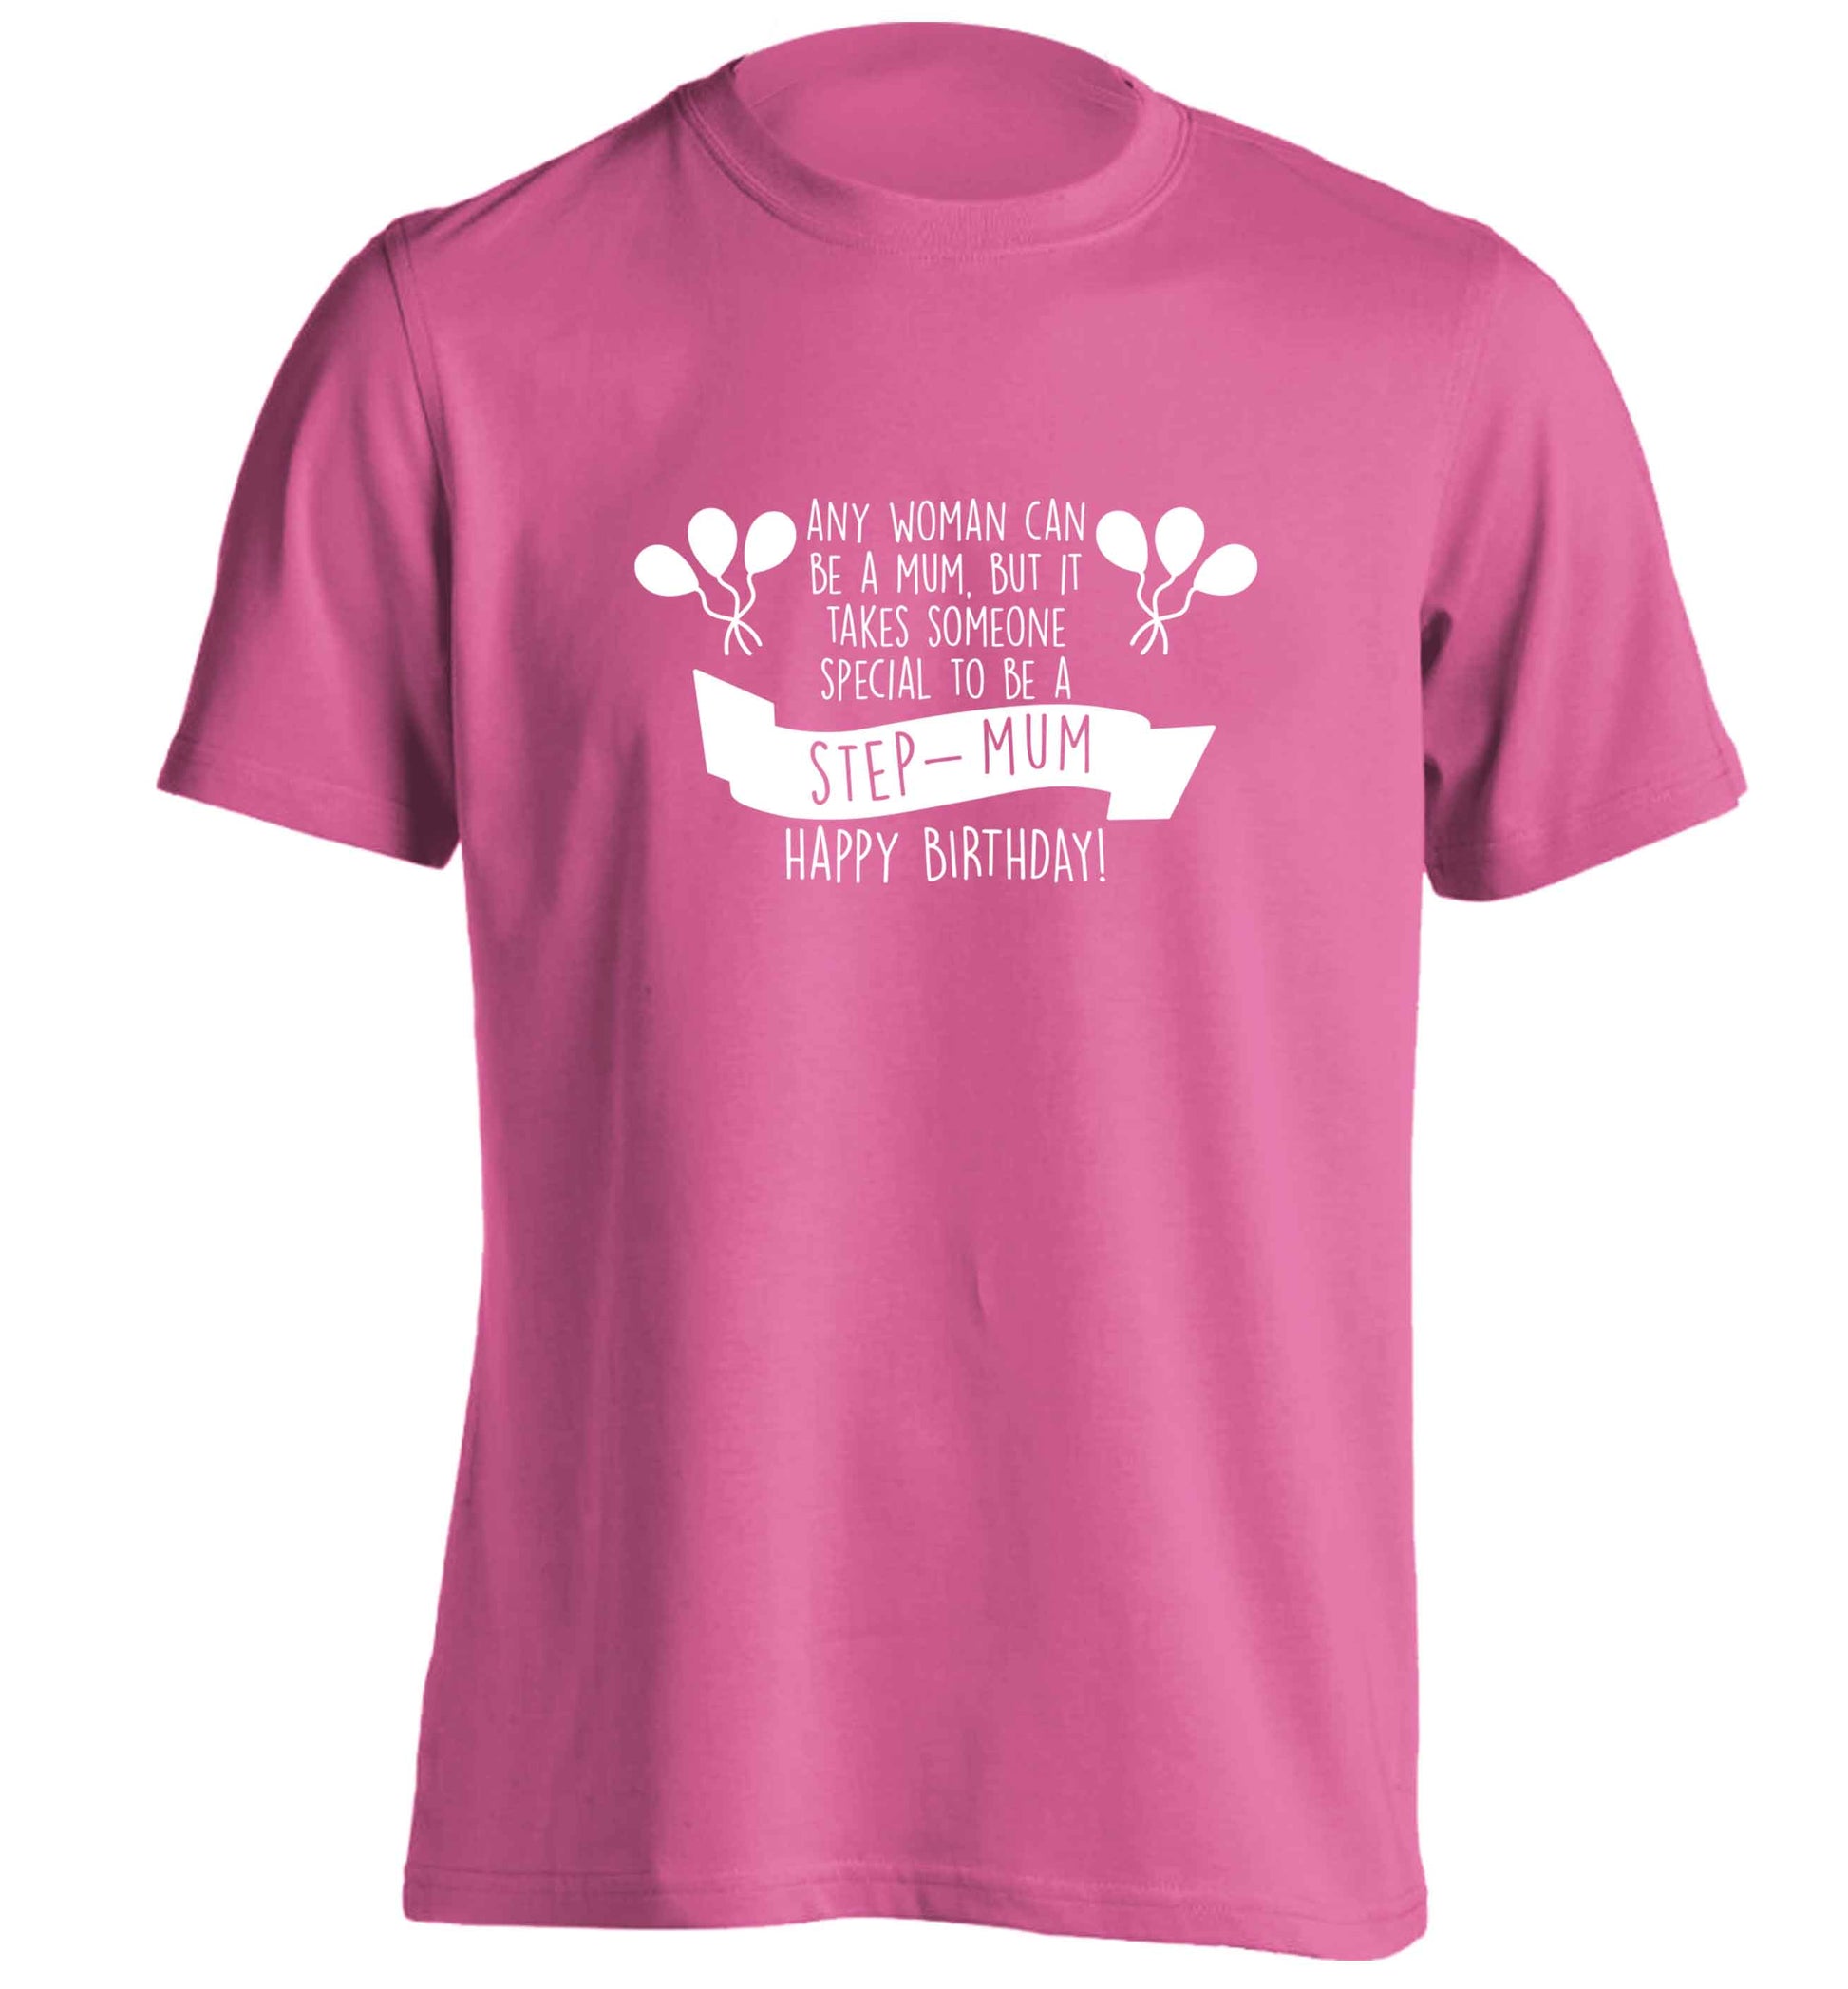 Takes someone special to be a step-mum, happy birthday! adults unisex pink Tshirt 2XL